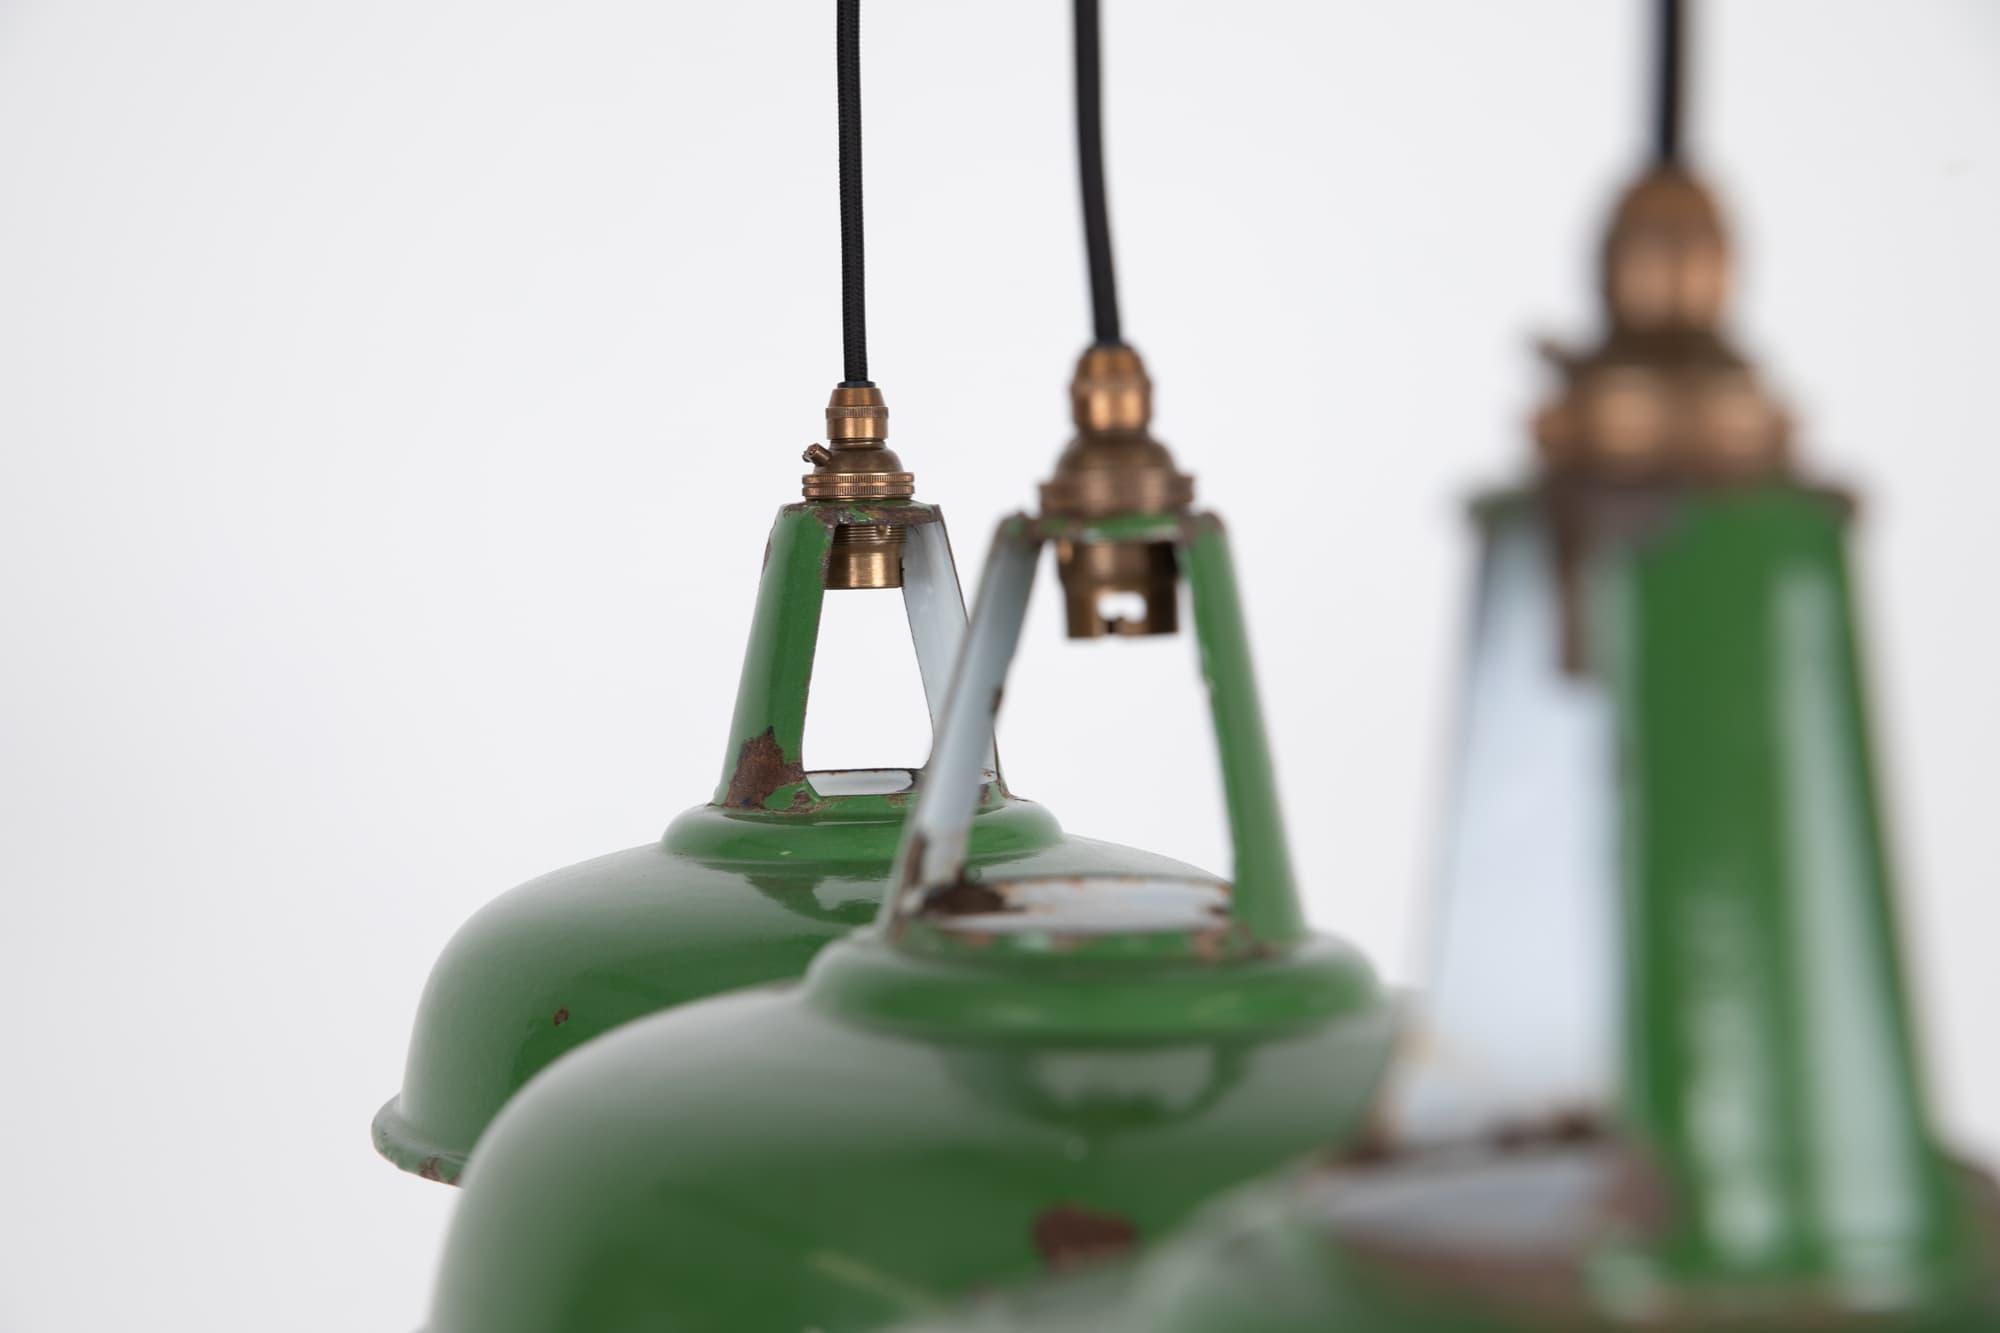 Mid-20th Century Vintage Industrial Coolicon Green Enamel Factory Pendant Light, C.1930 For Sale